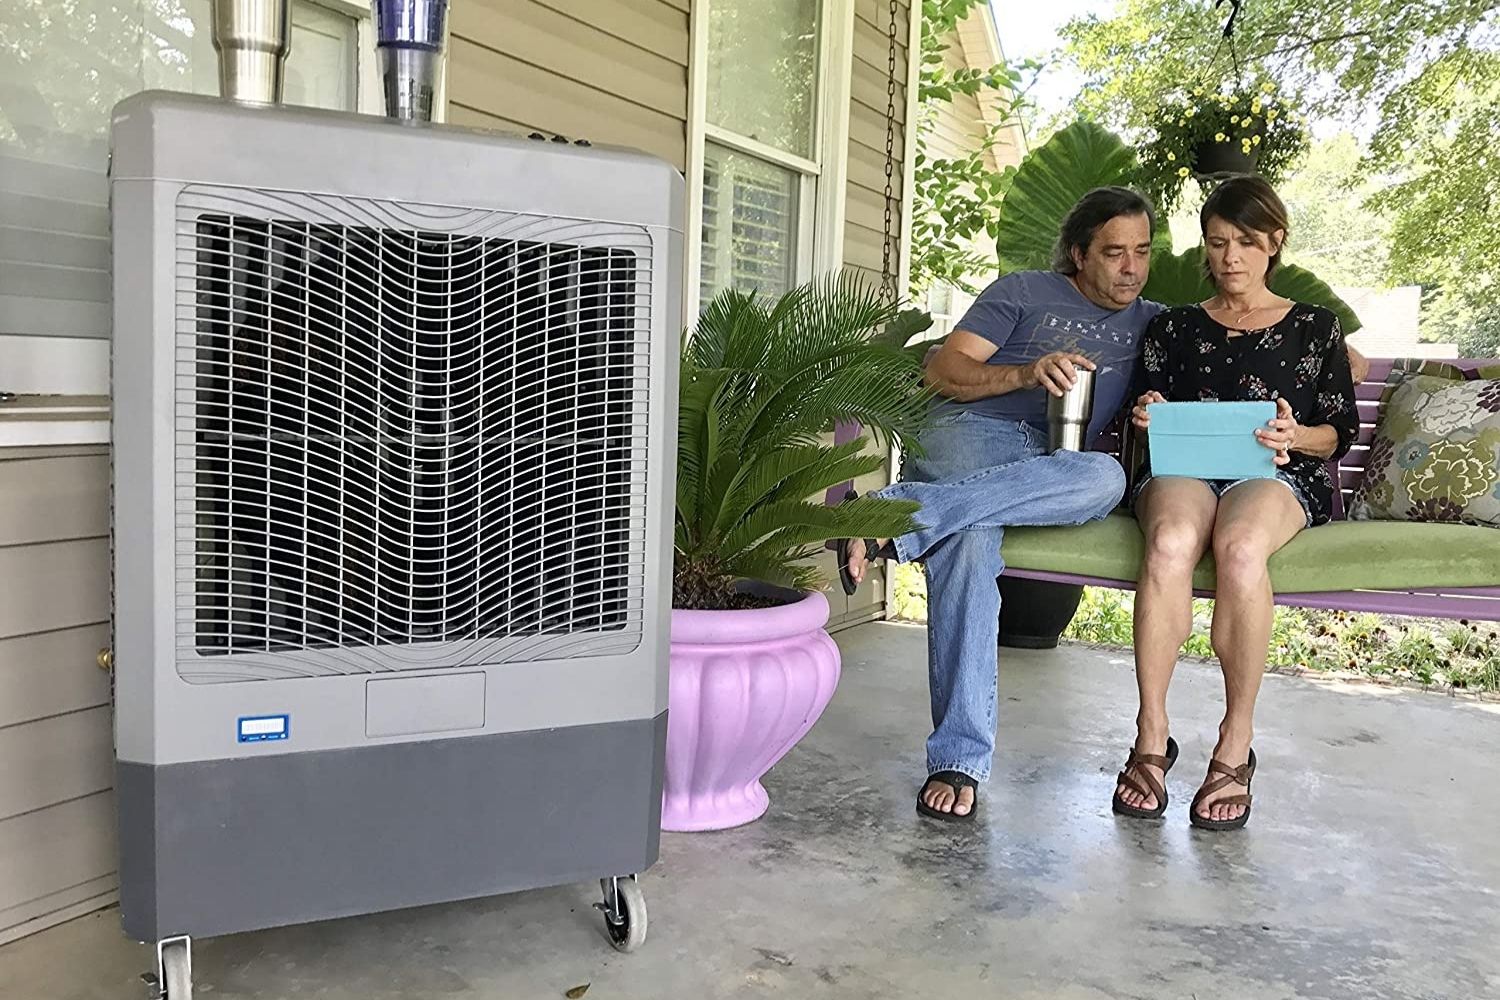 The best evaporative air cooler option on a porch near two people sitting on a porch swing